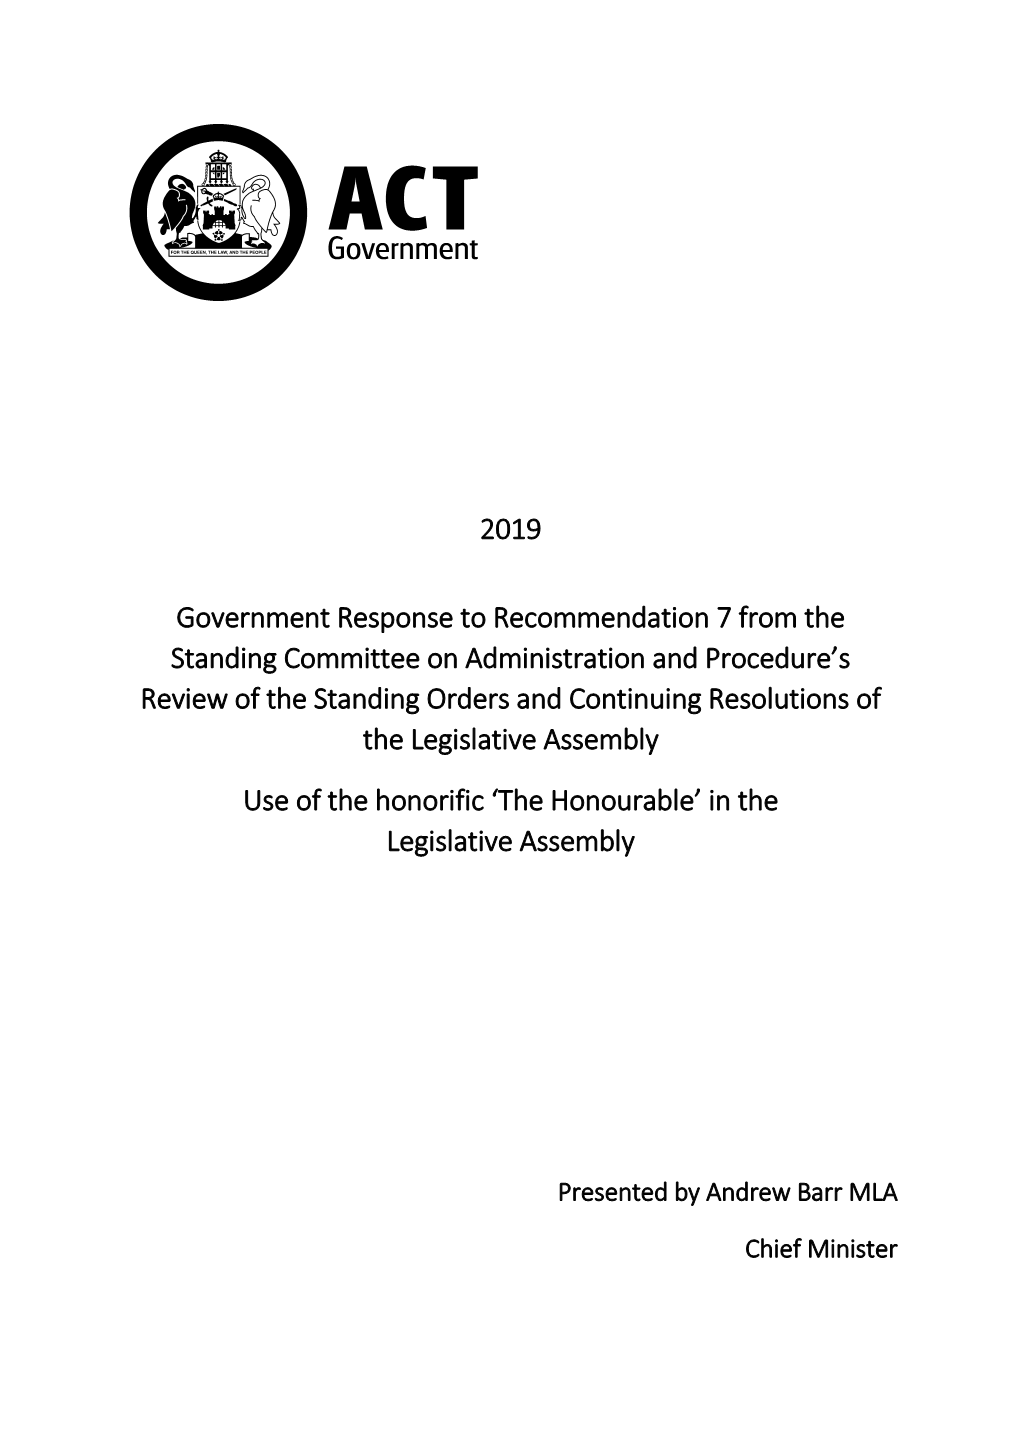 Government Response to Recommendation 7, Relating to The